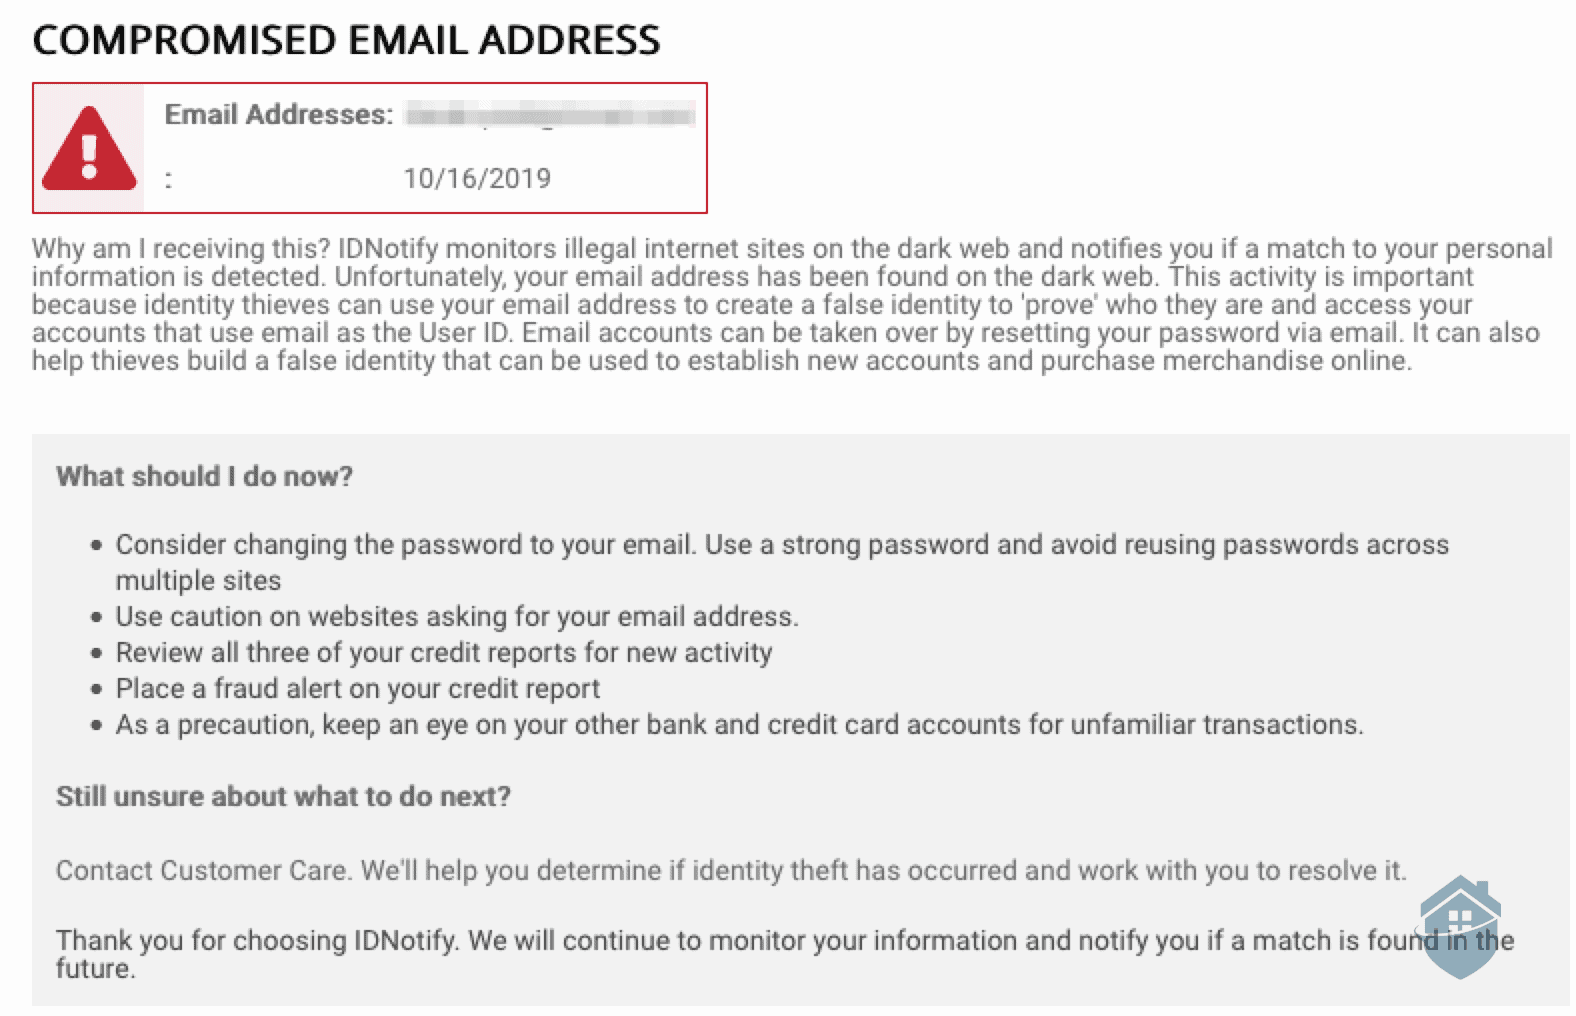 IDnotify Compromised Email